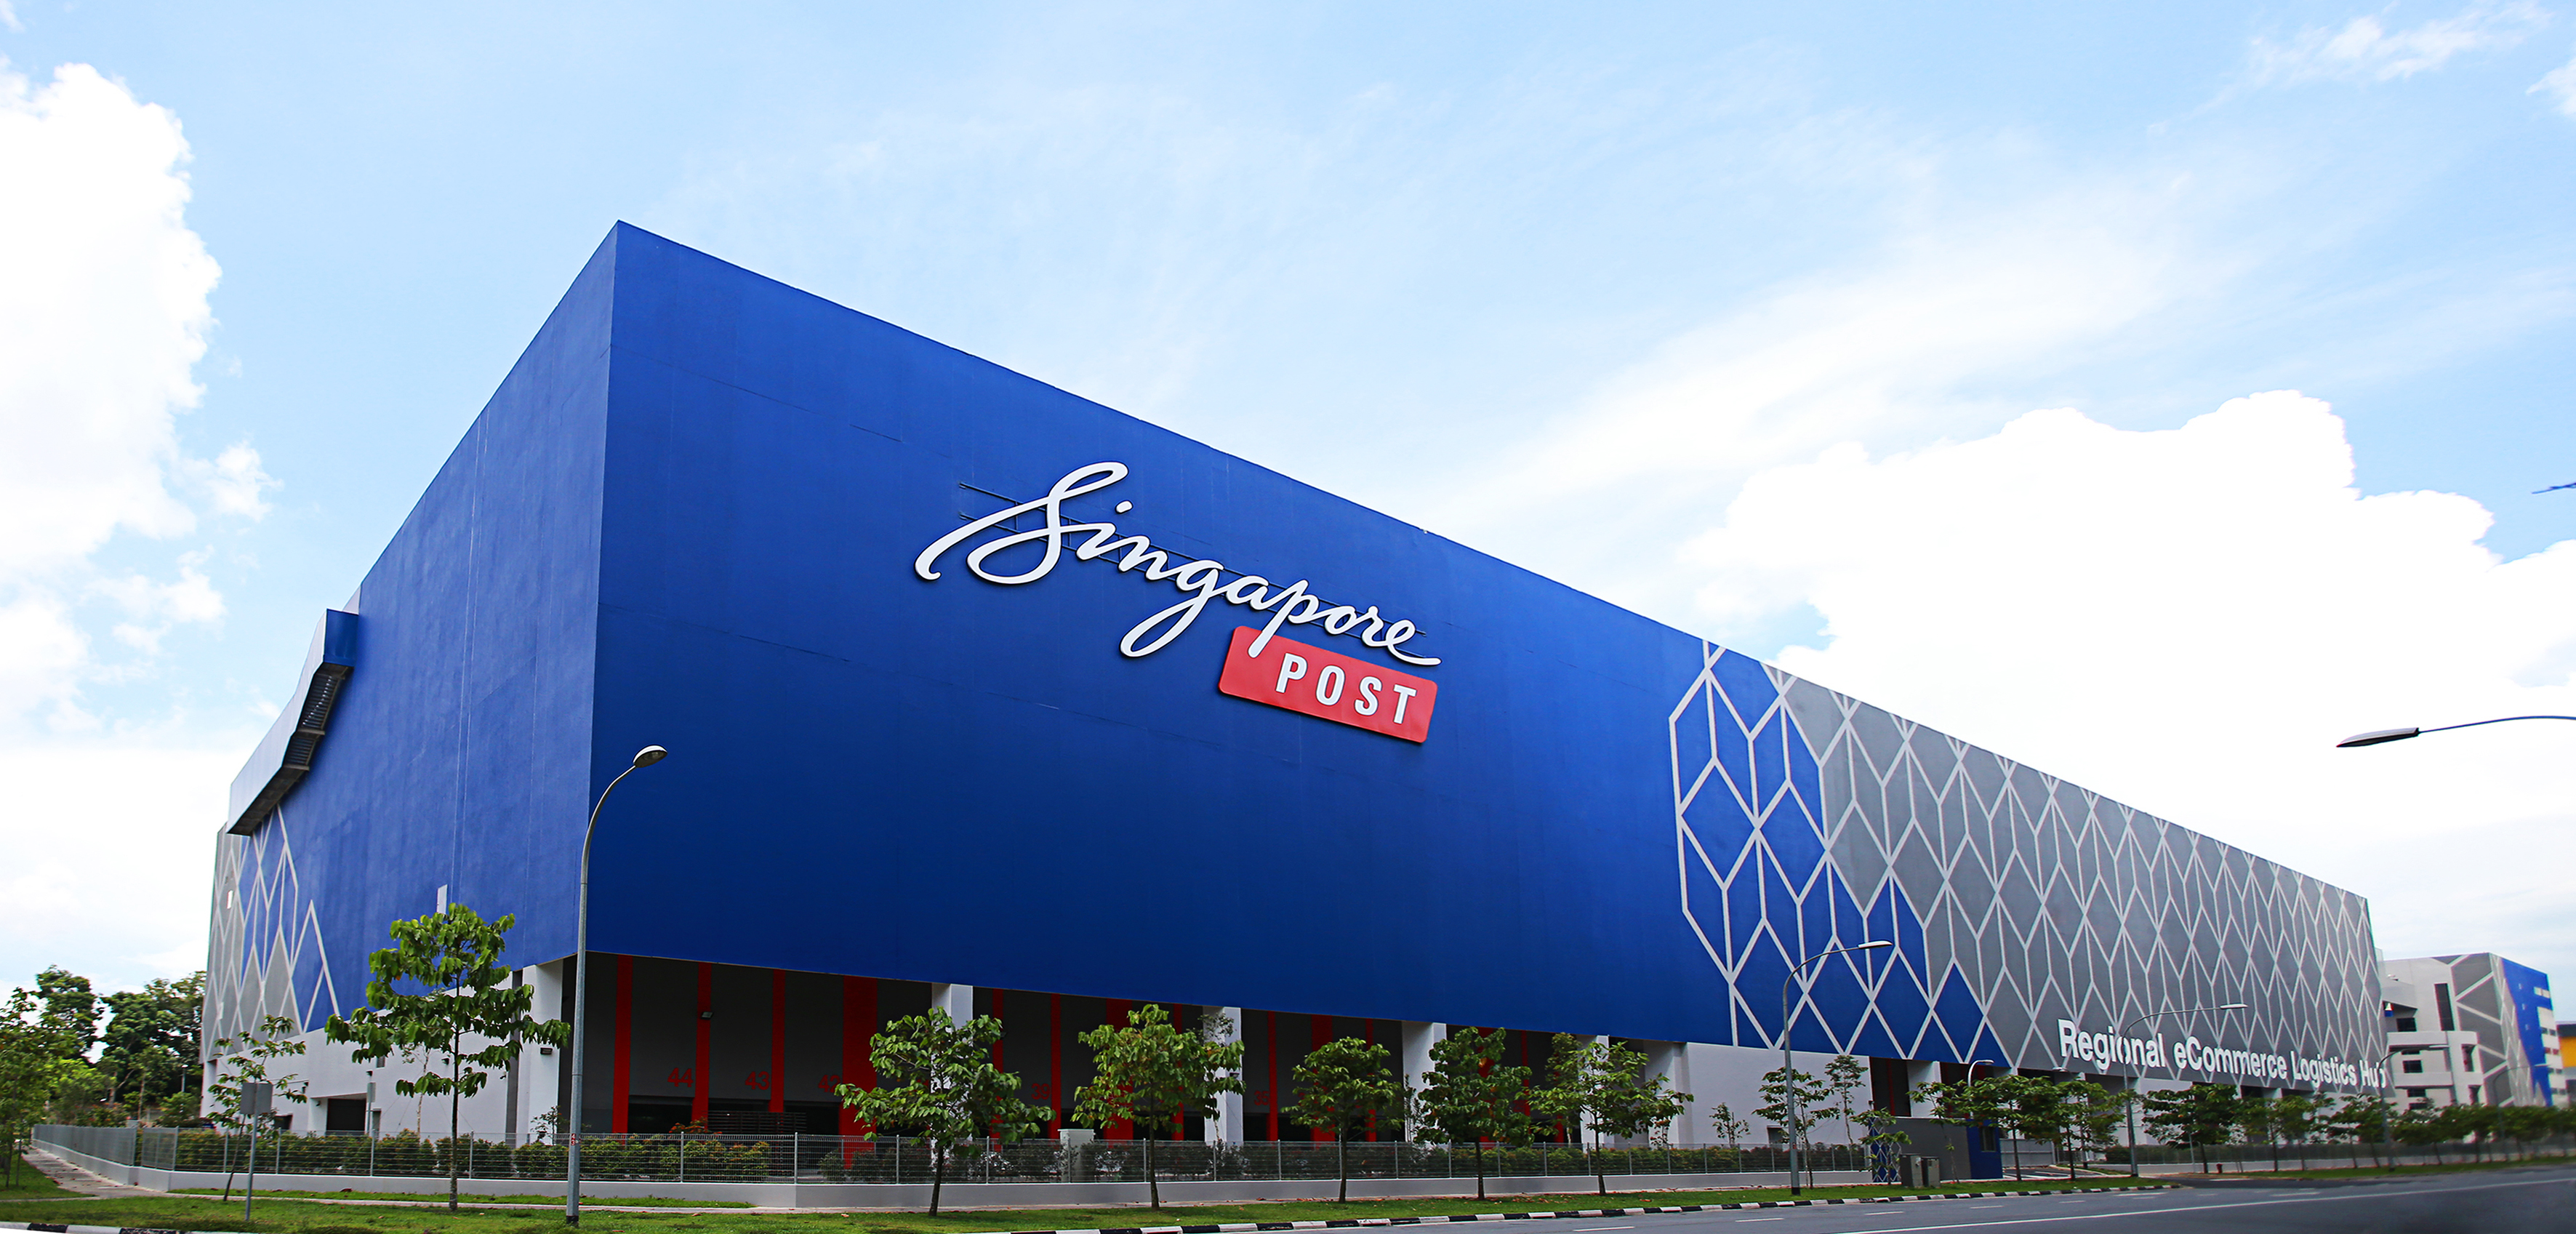 UOBKH: Singapore Post (SPOST SP) – Hold Target Price $0.46